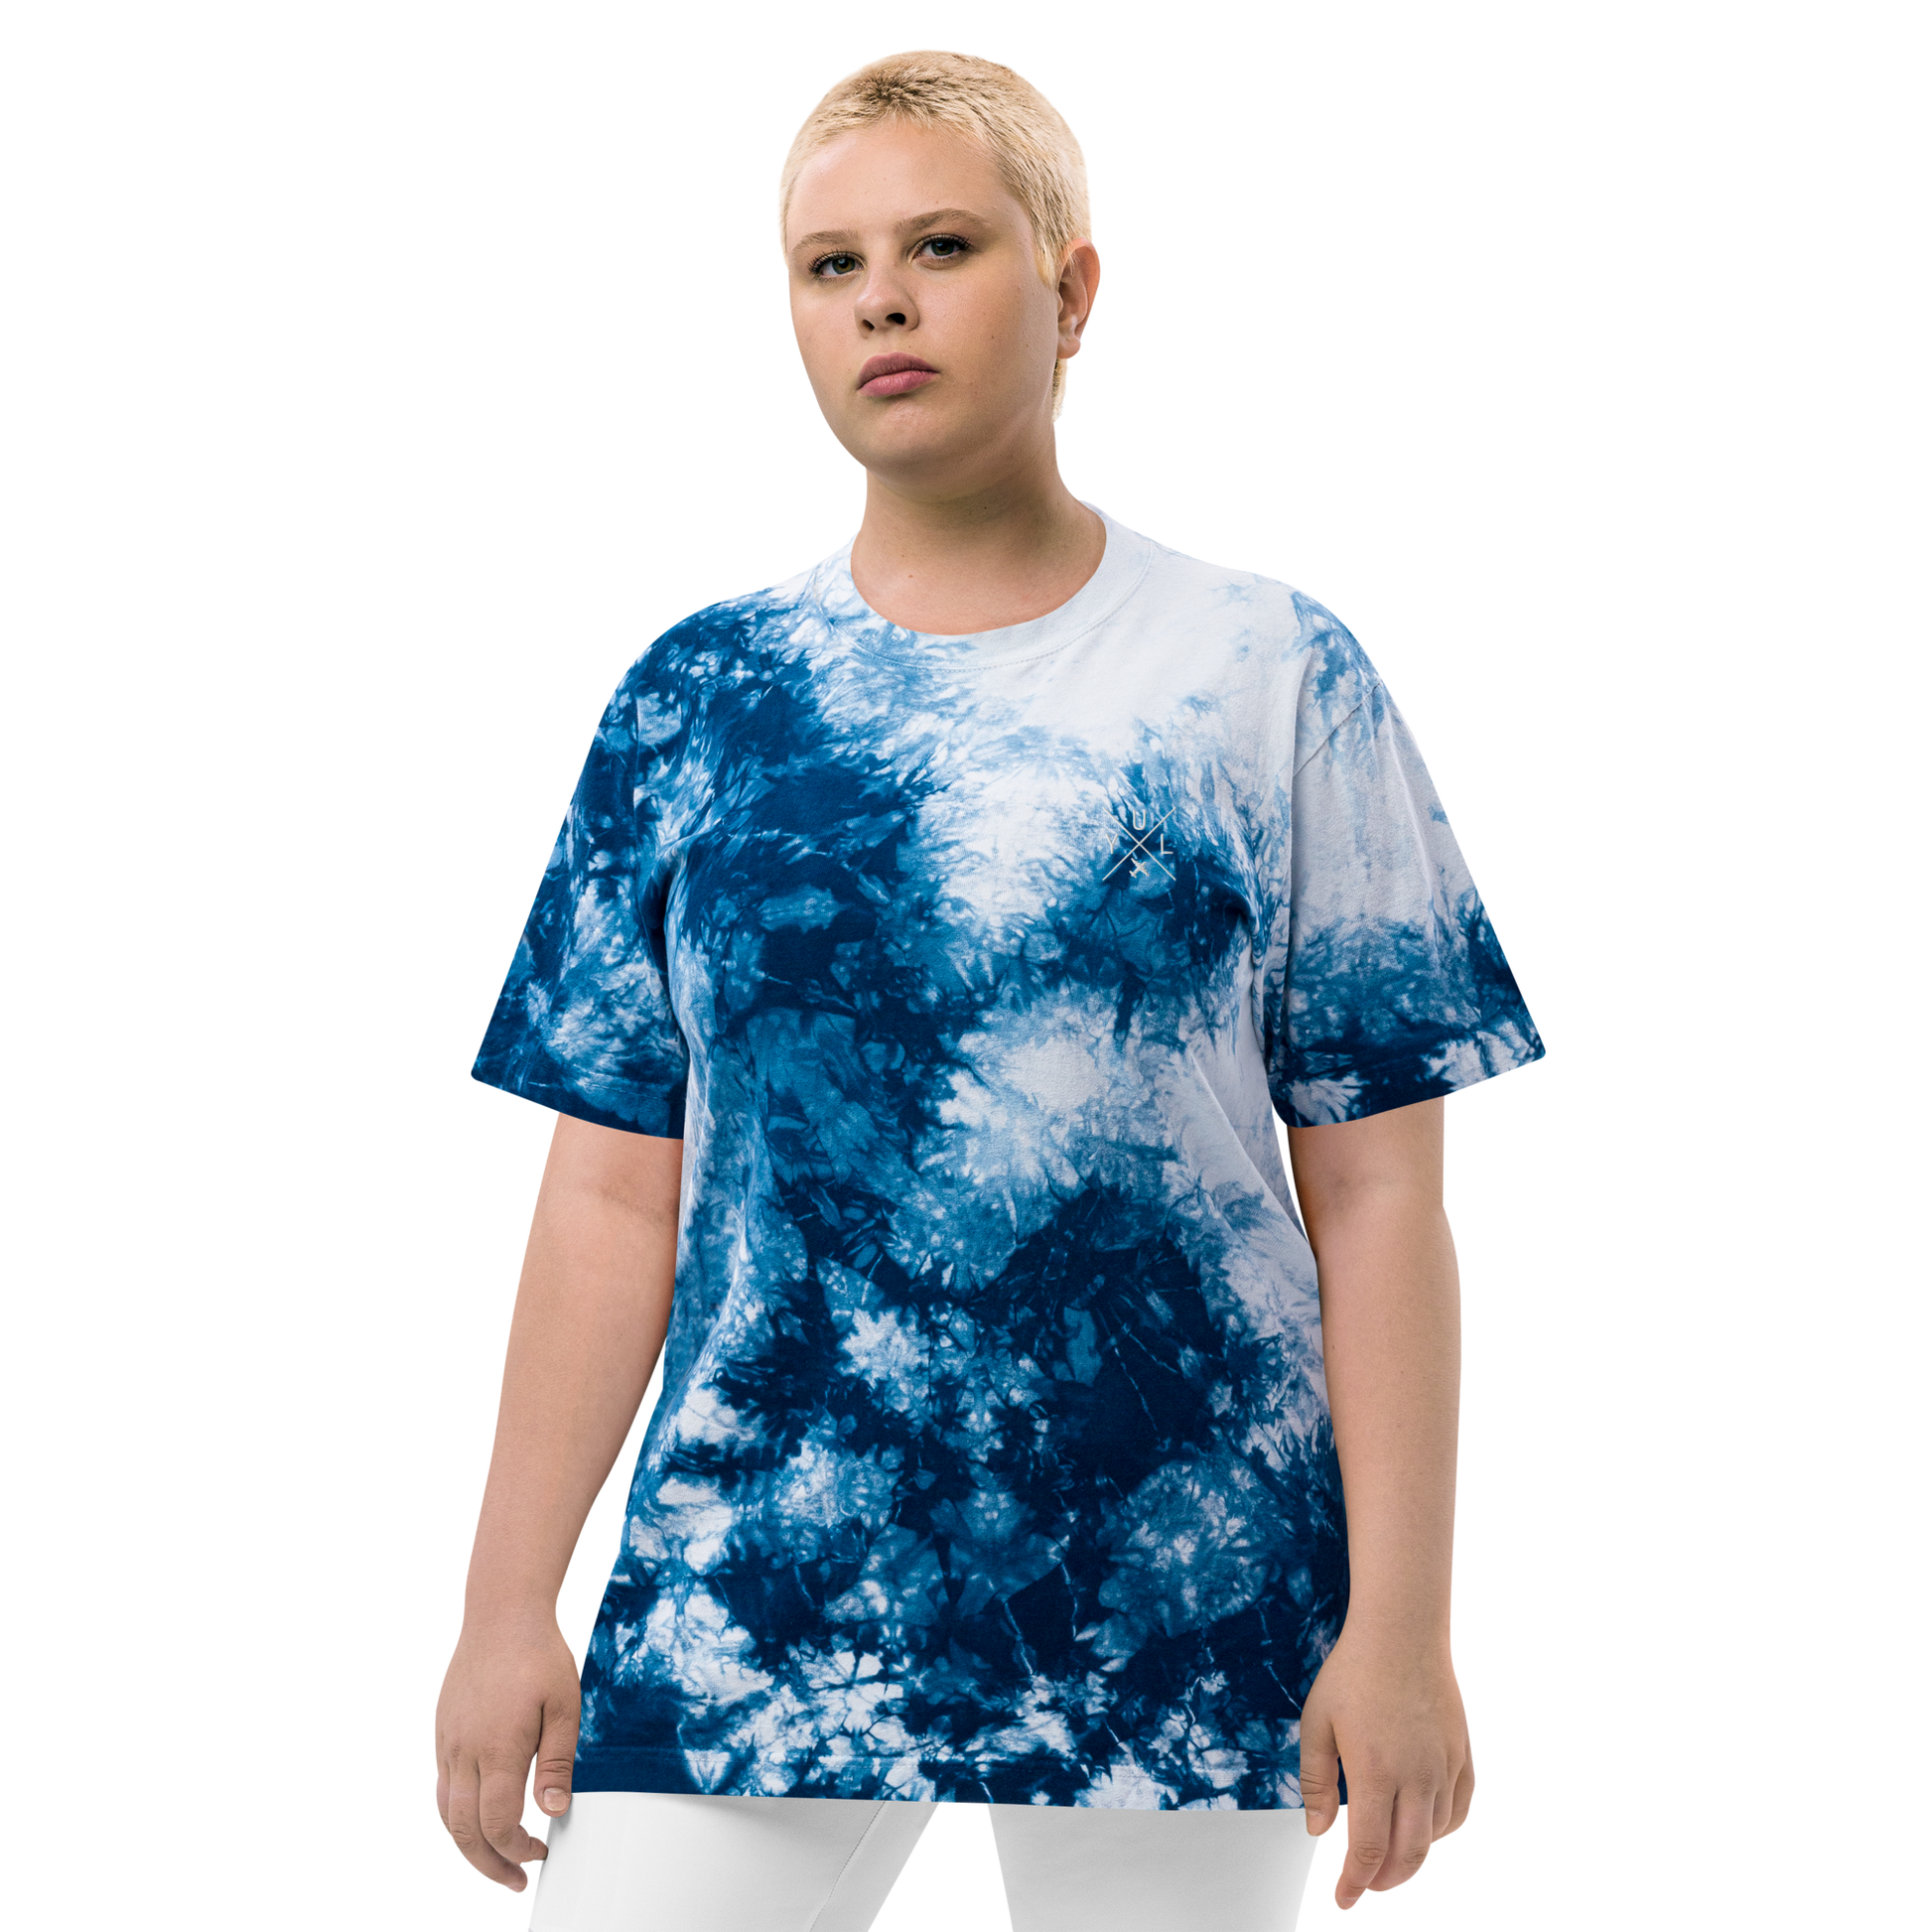 YHM Designs - YUL Montreal Oversized Tie-Dye T-Shirt - Crossed-X Design with Airport Code and Vintage Propliner - White Embroidery - Image 08